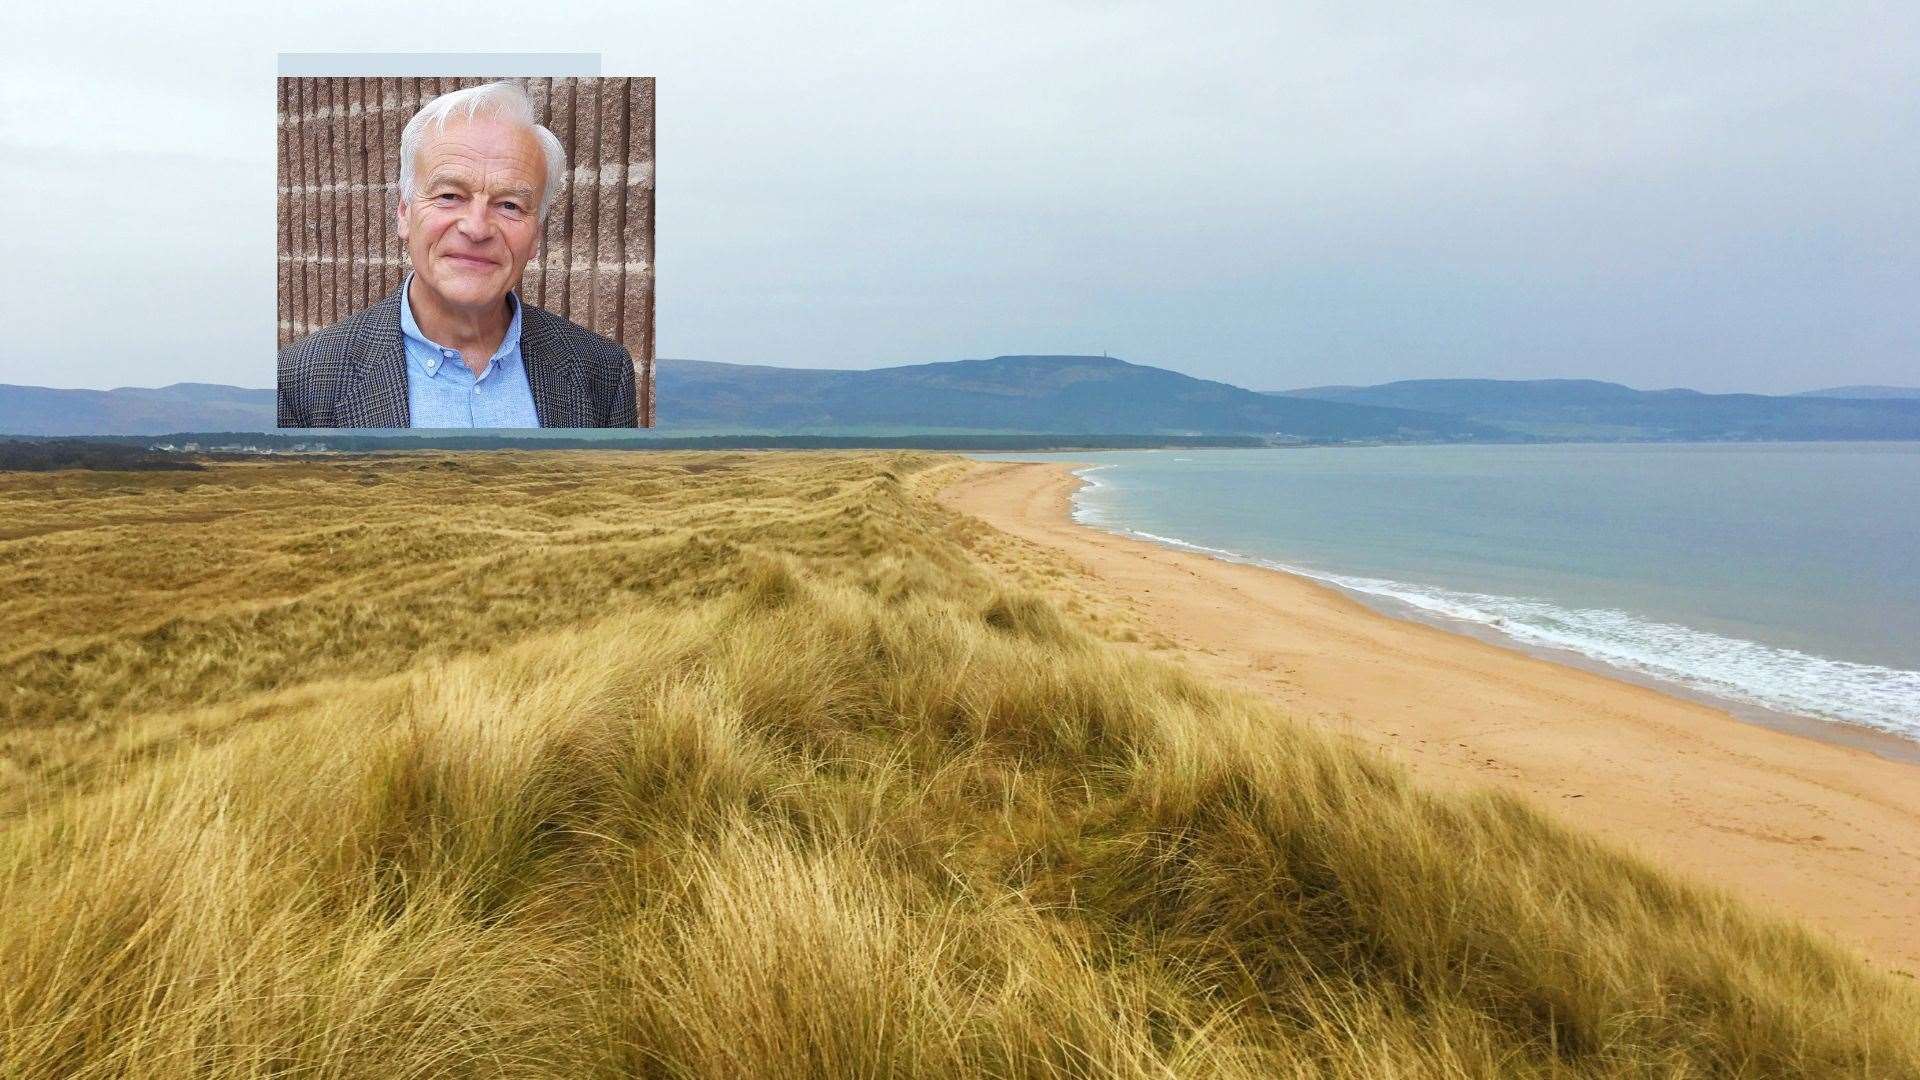 Dornoch Area Community Council chairman Paddy Murray seconded the motion to support the Coul Links golf course development.